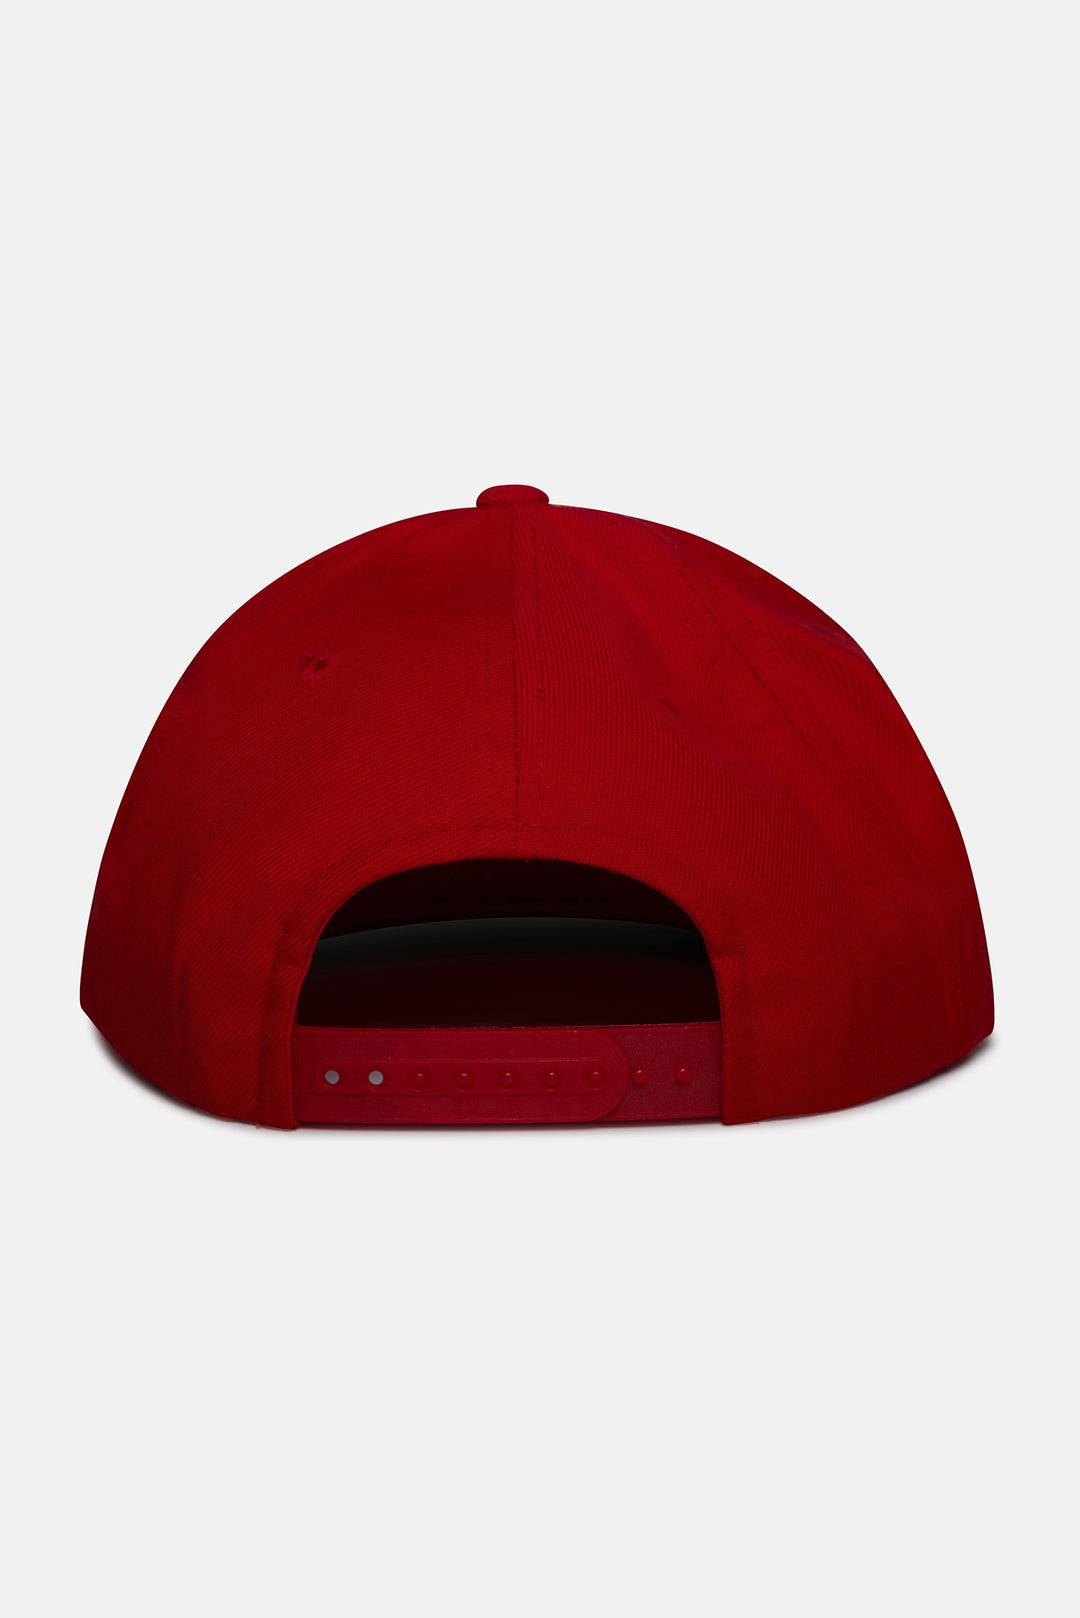 West Hampton Surf and Sun Snapback Red/White